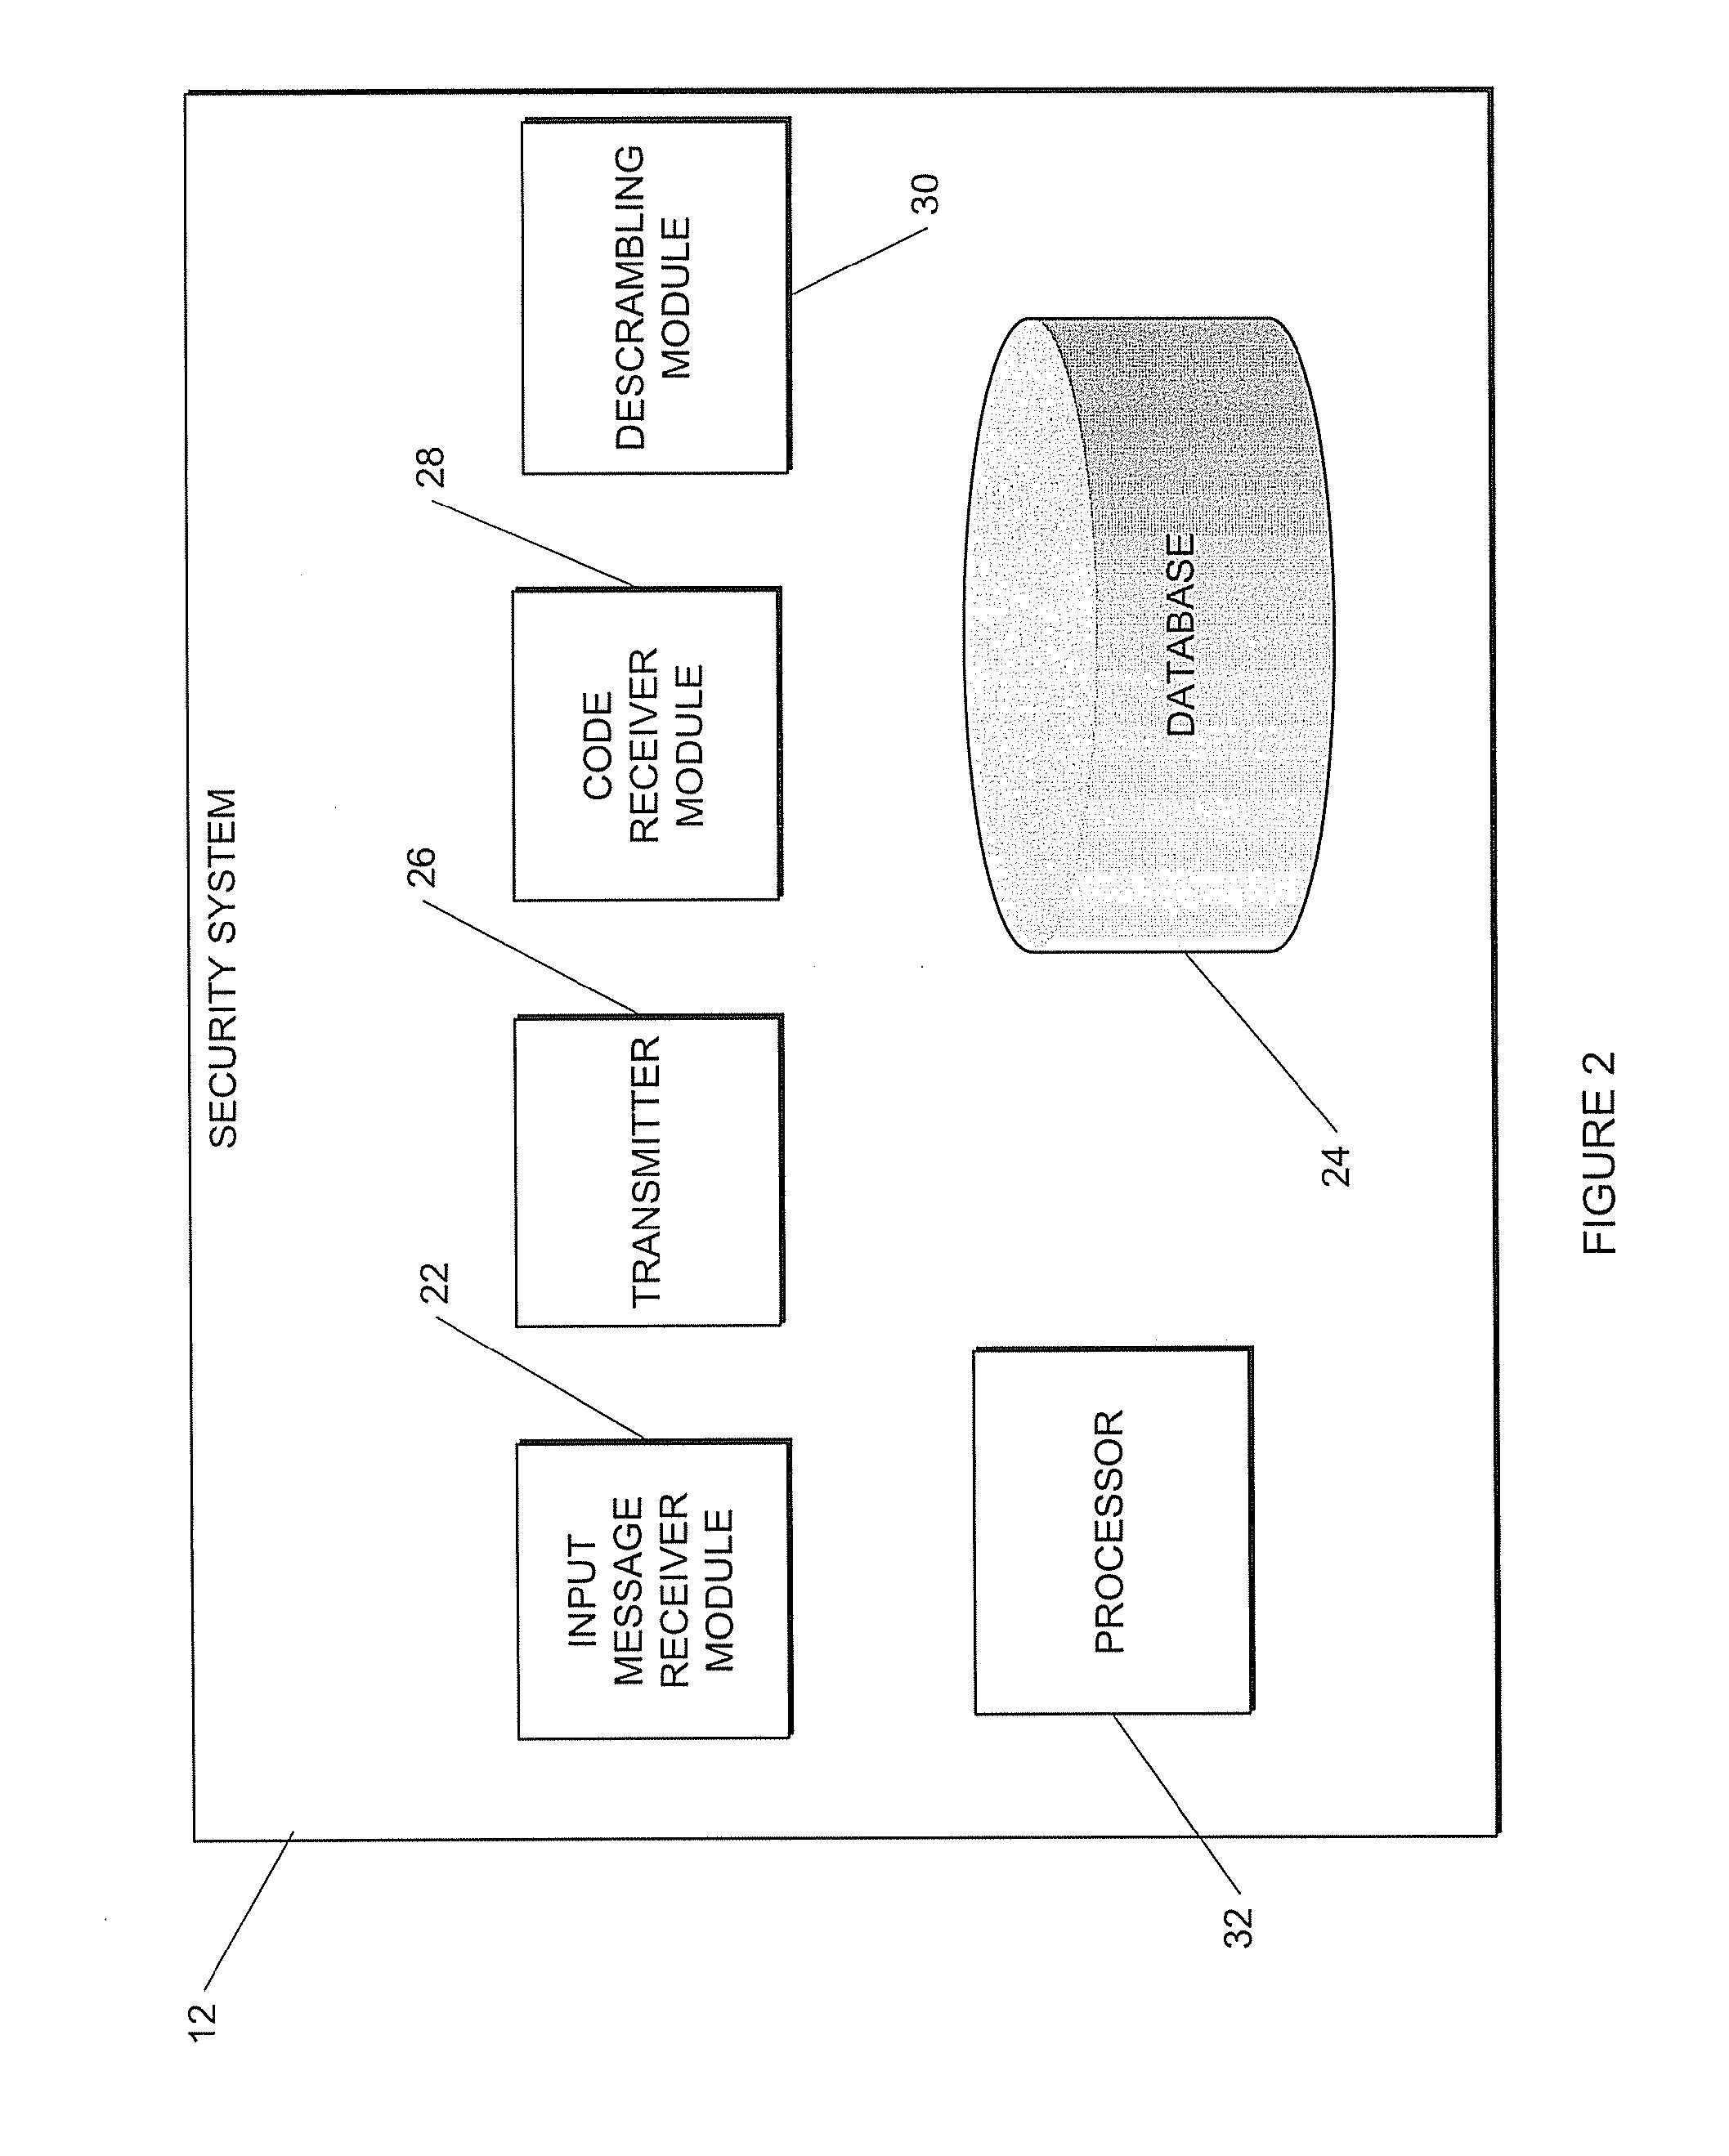 Security system and method